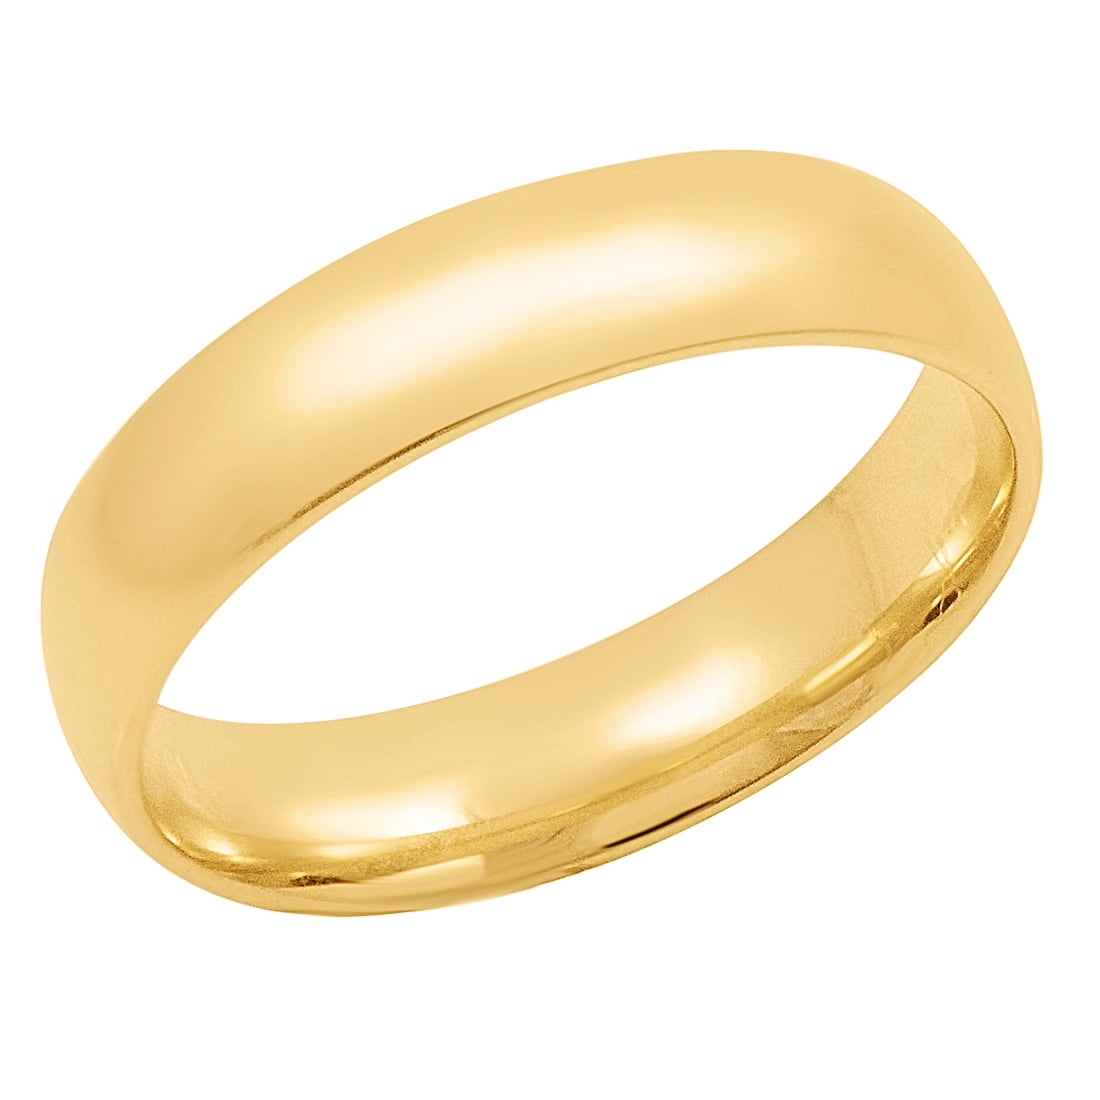 3mm Plain Comfort Fit 14K Solid Yellow Gold Wedding Band Ring Sizes 5 to 12 